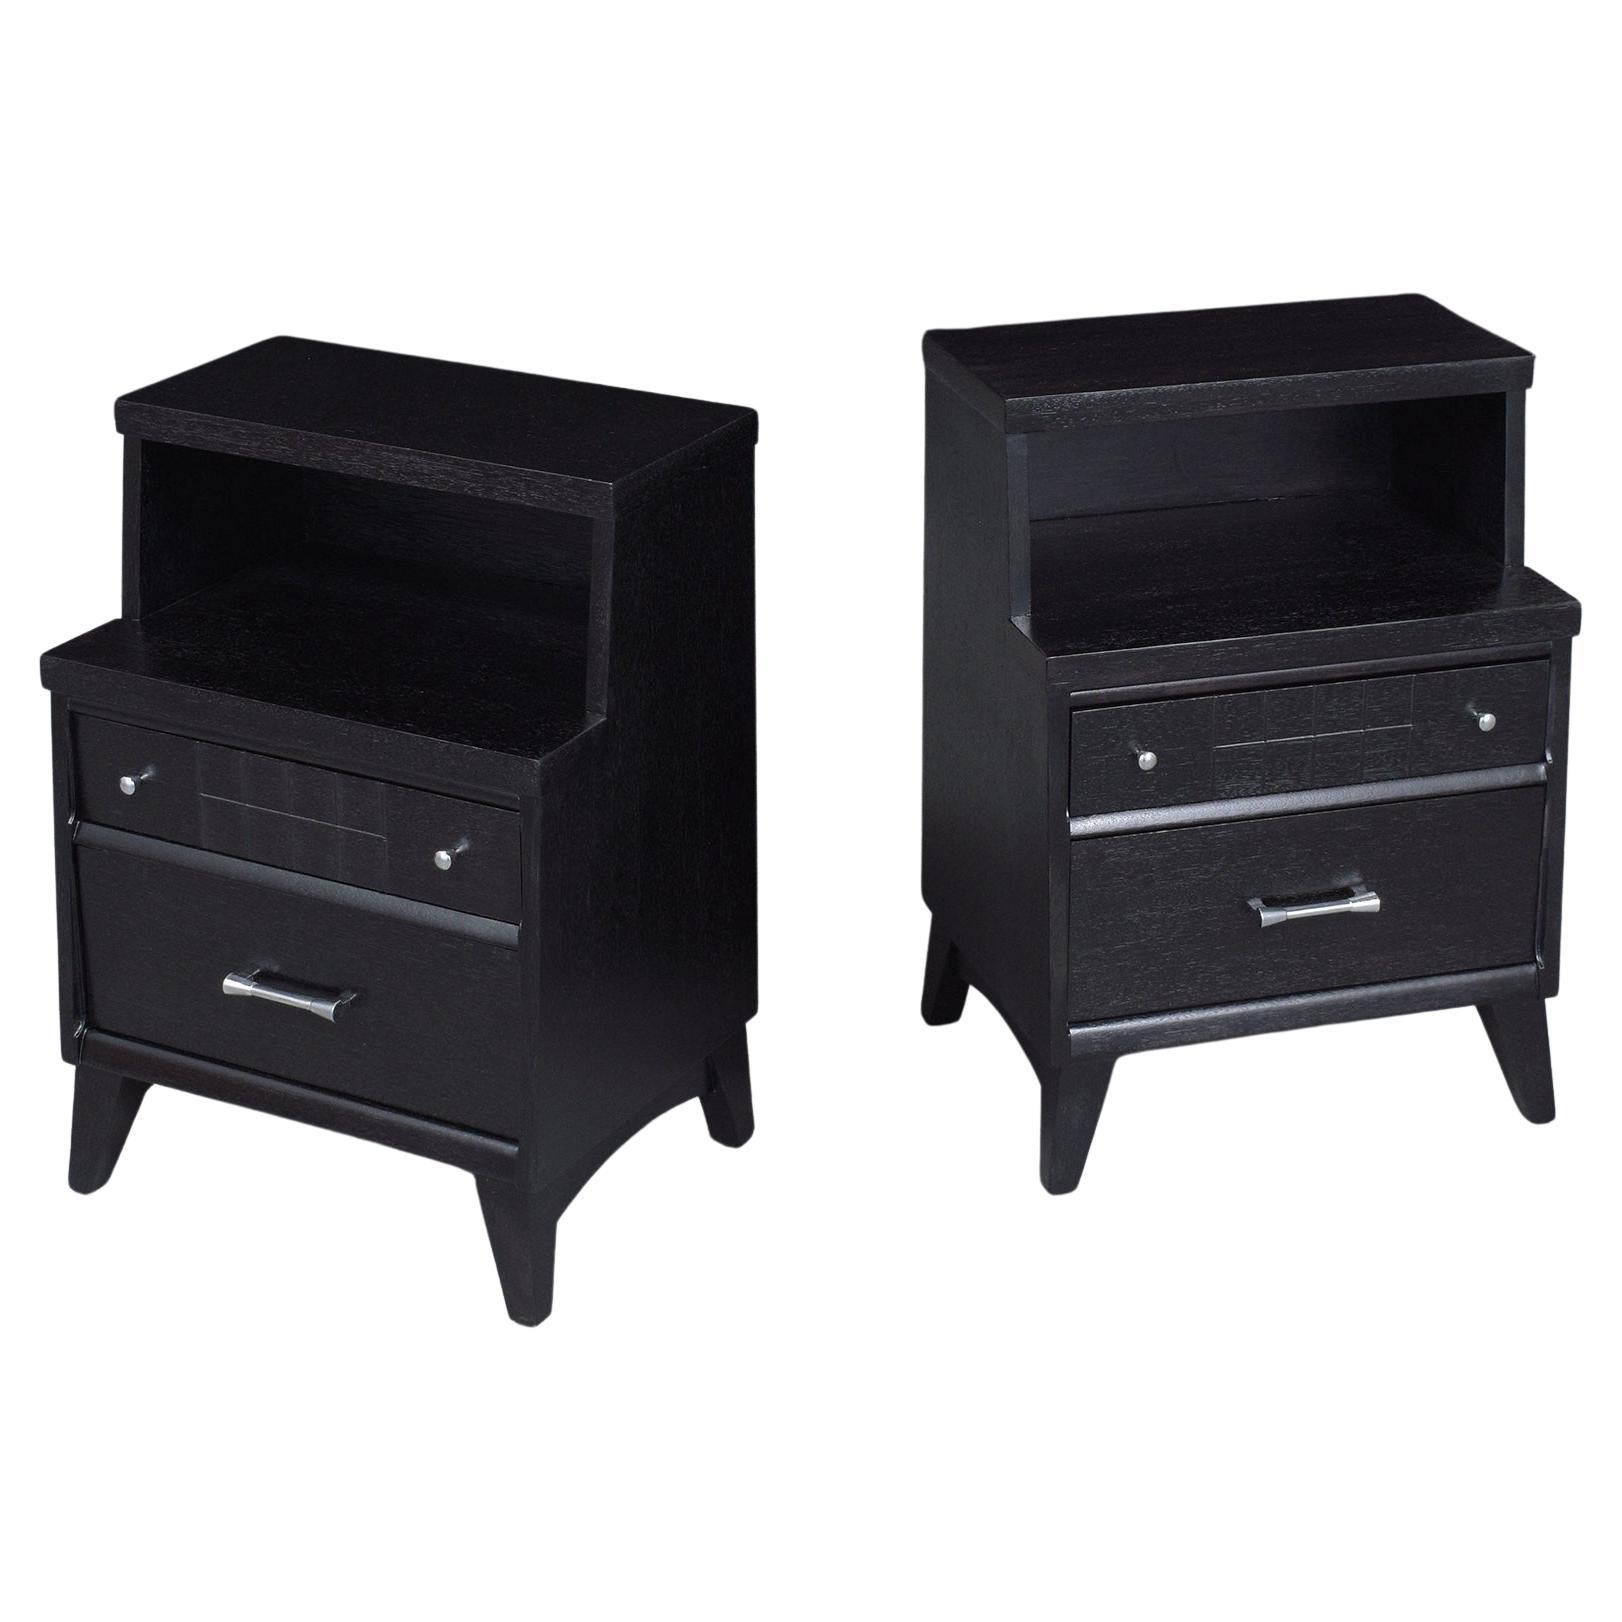 Restored Mid-Century Modern Nightstands with Ebonized Finish and Chrome Hardware